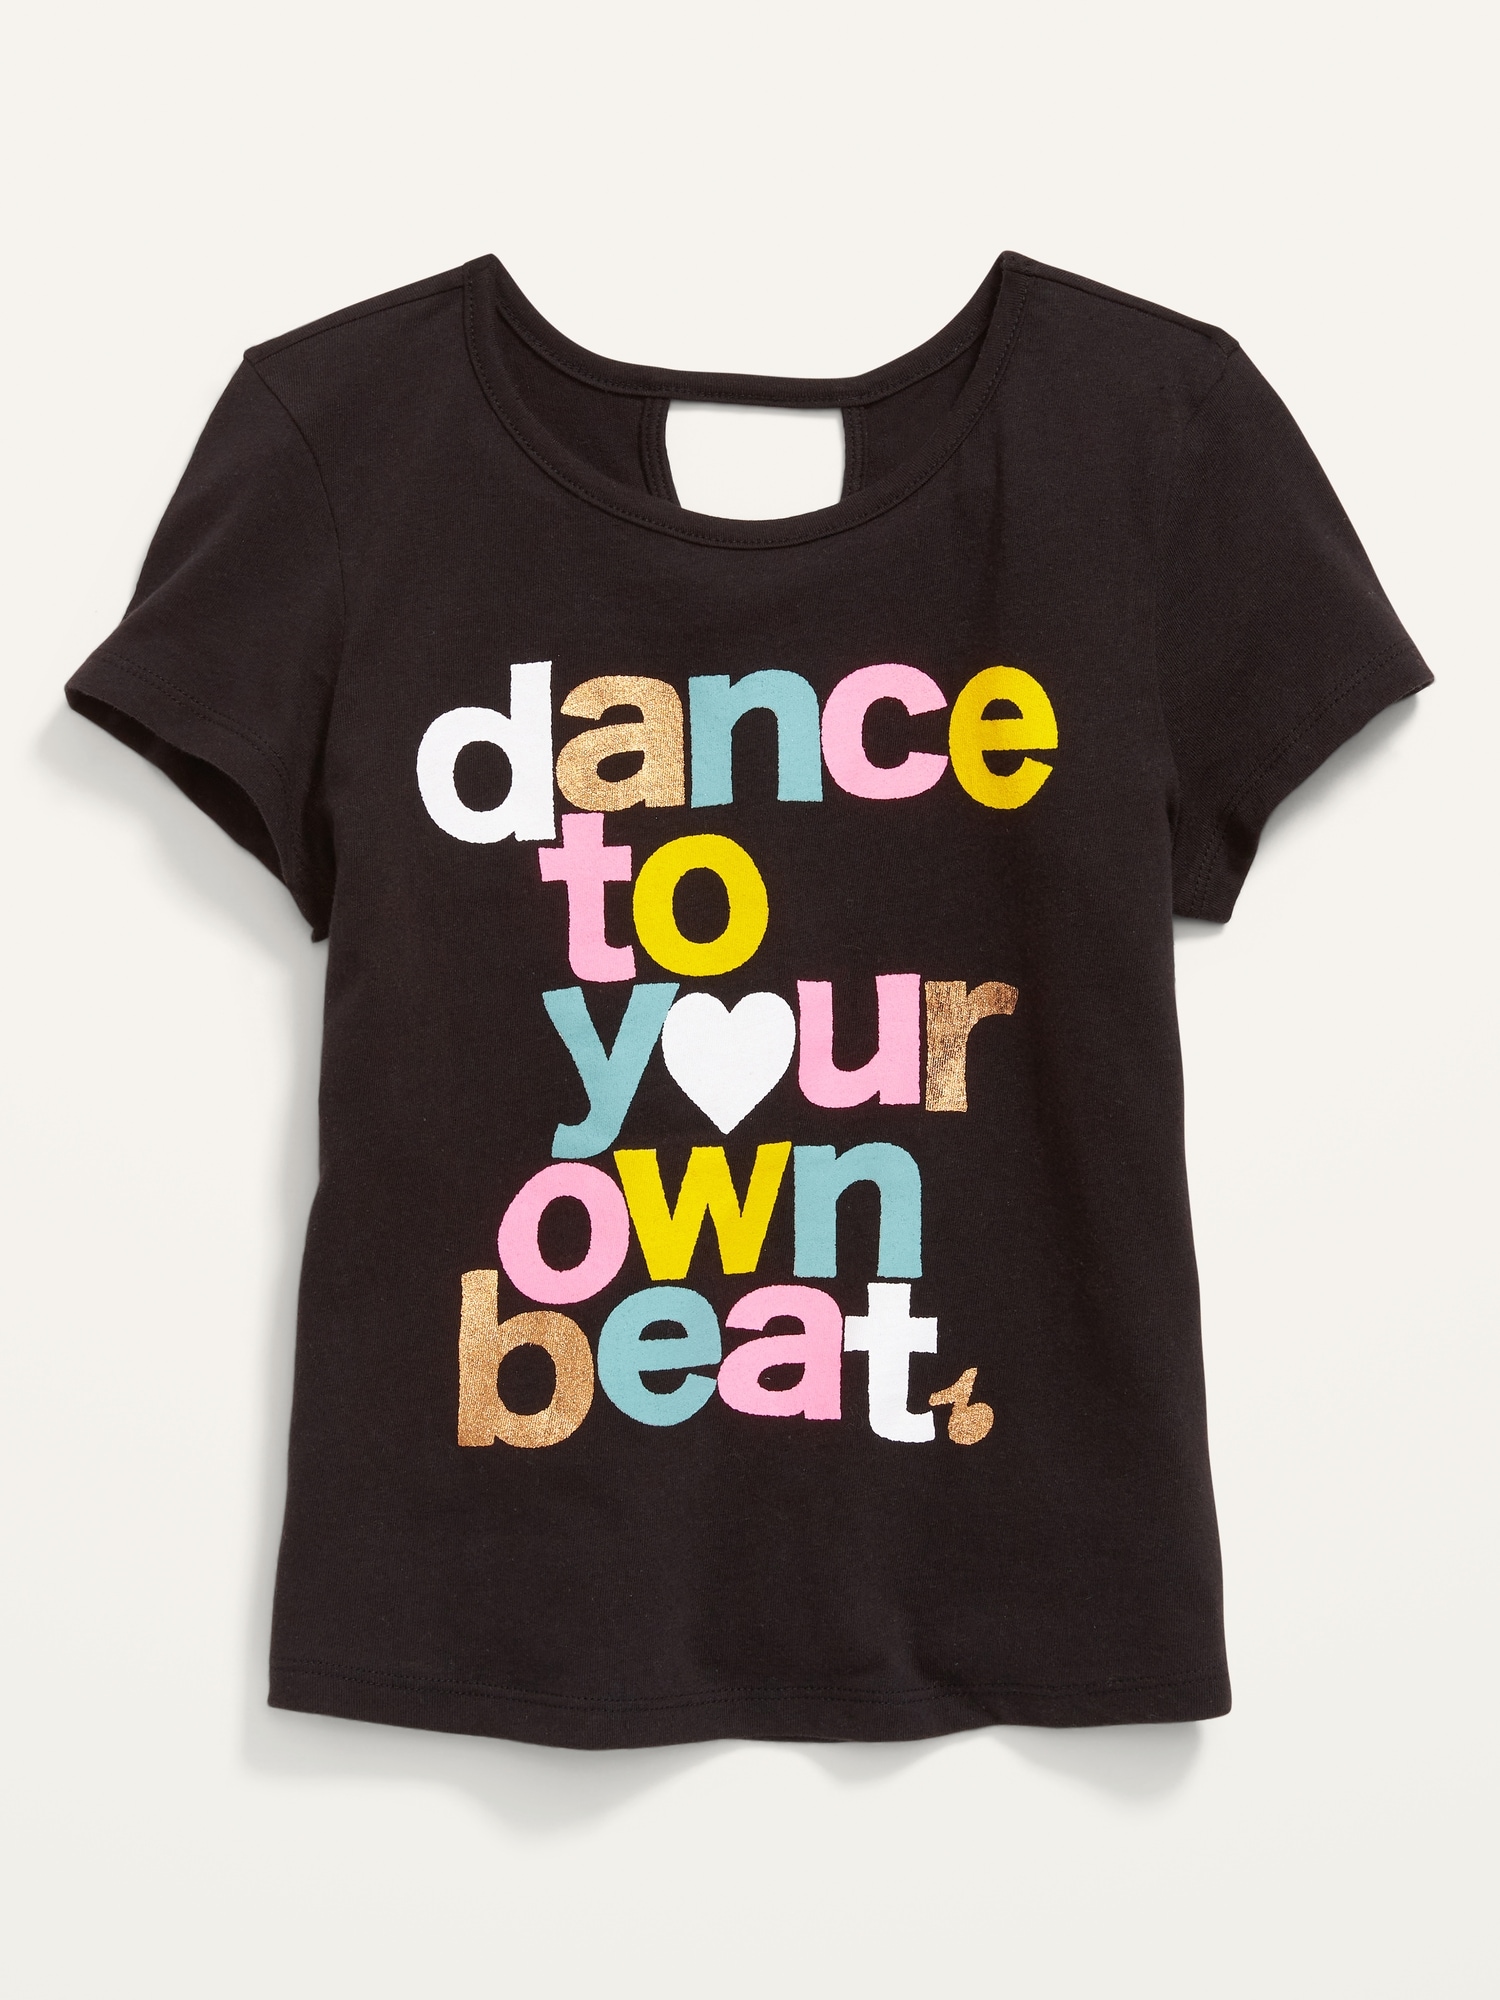 Short-Sleeve Graphic Keyhole-Cutout T-Shirt for Girls